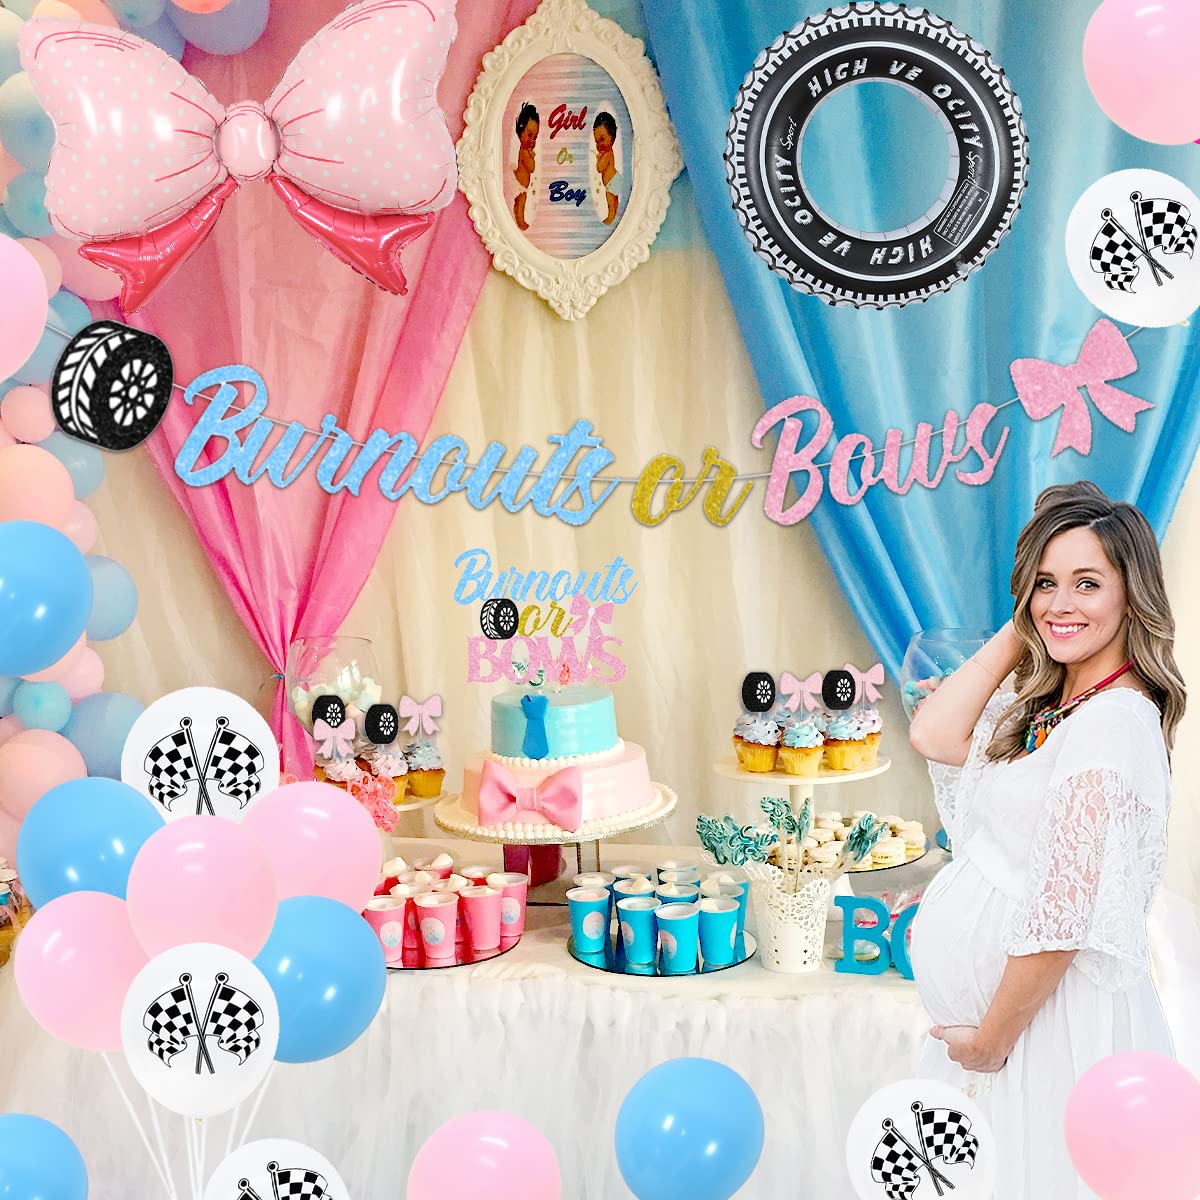 Burnouts or bows cake toppers, balloons and banners